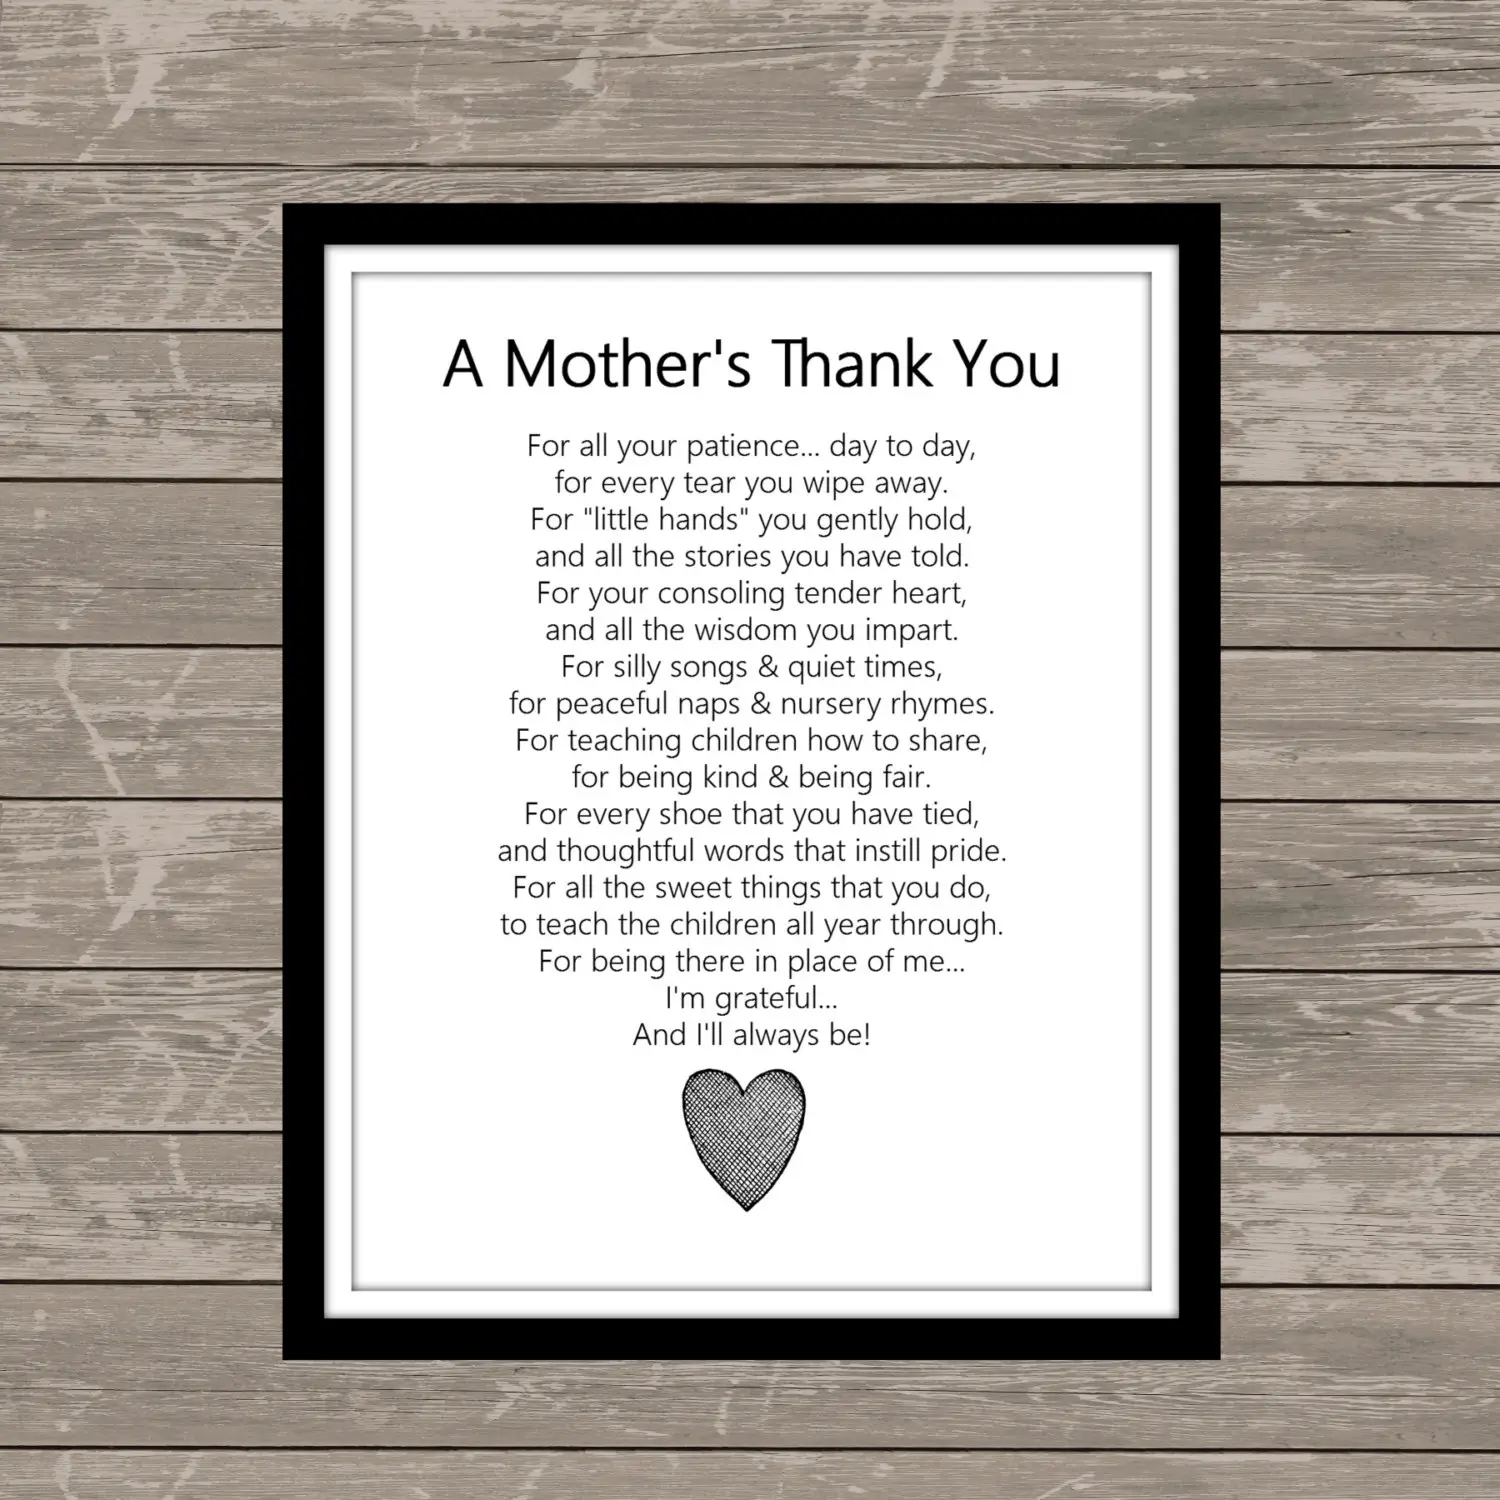 Thank mother. Thank you mom. Thank you Letter для мамы. Thank you poem. A mother's Day poem фон.